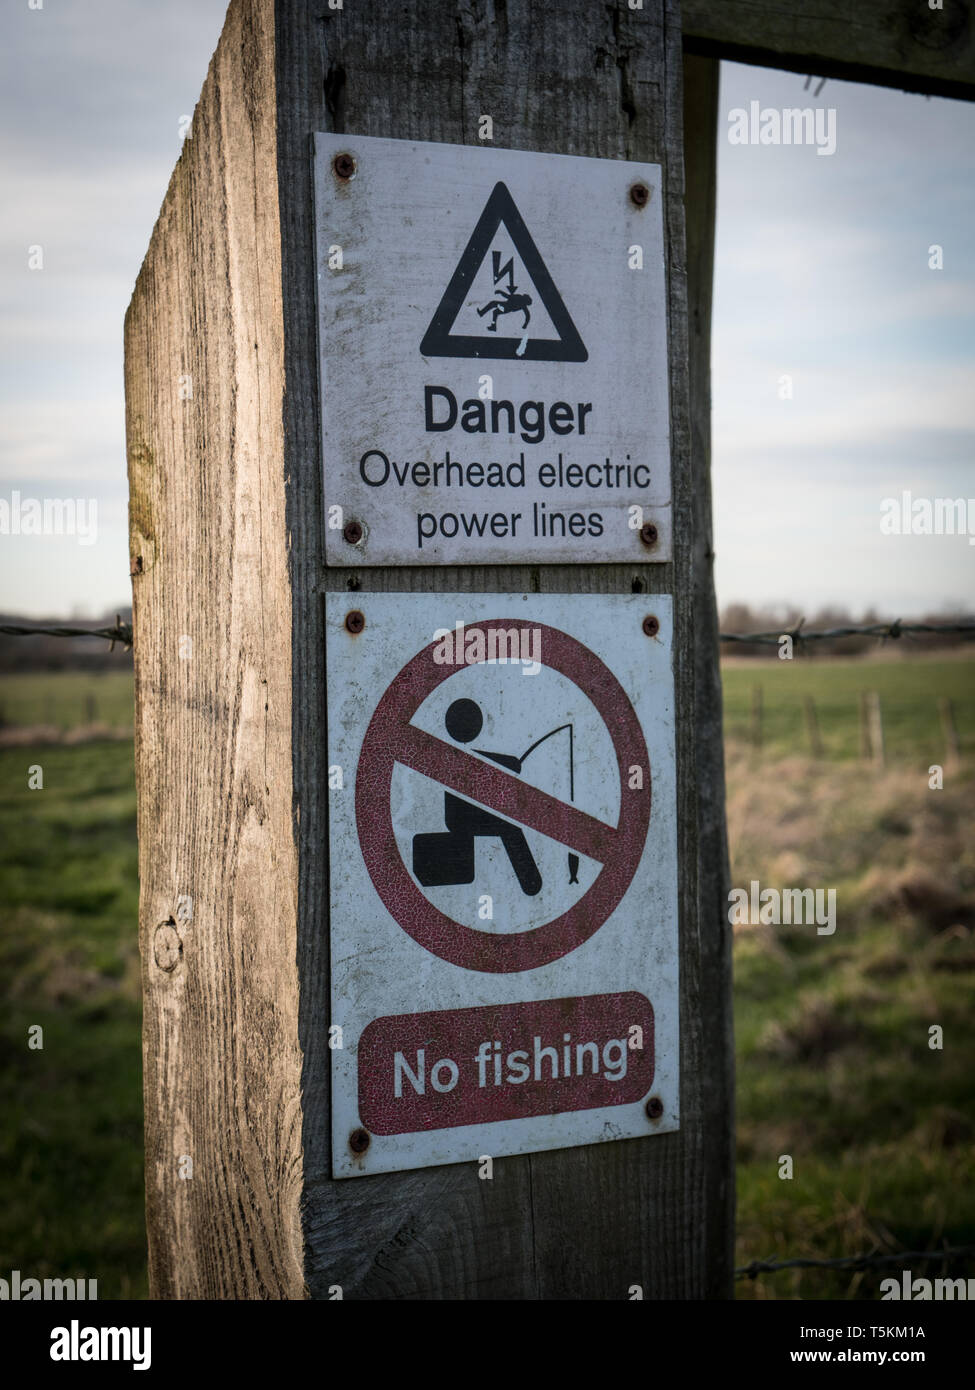 Safety warning signs relating to overhead power lines and fishing  restrictions. England UK Stock Photo - Alamy